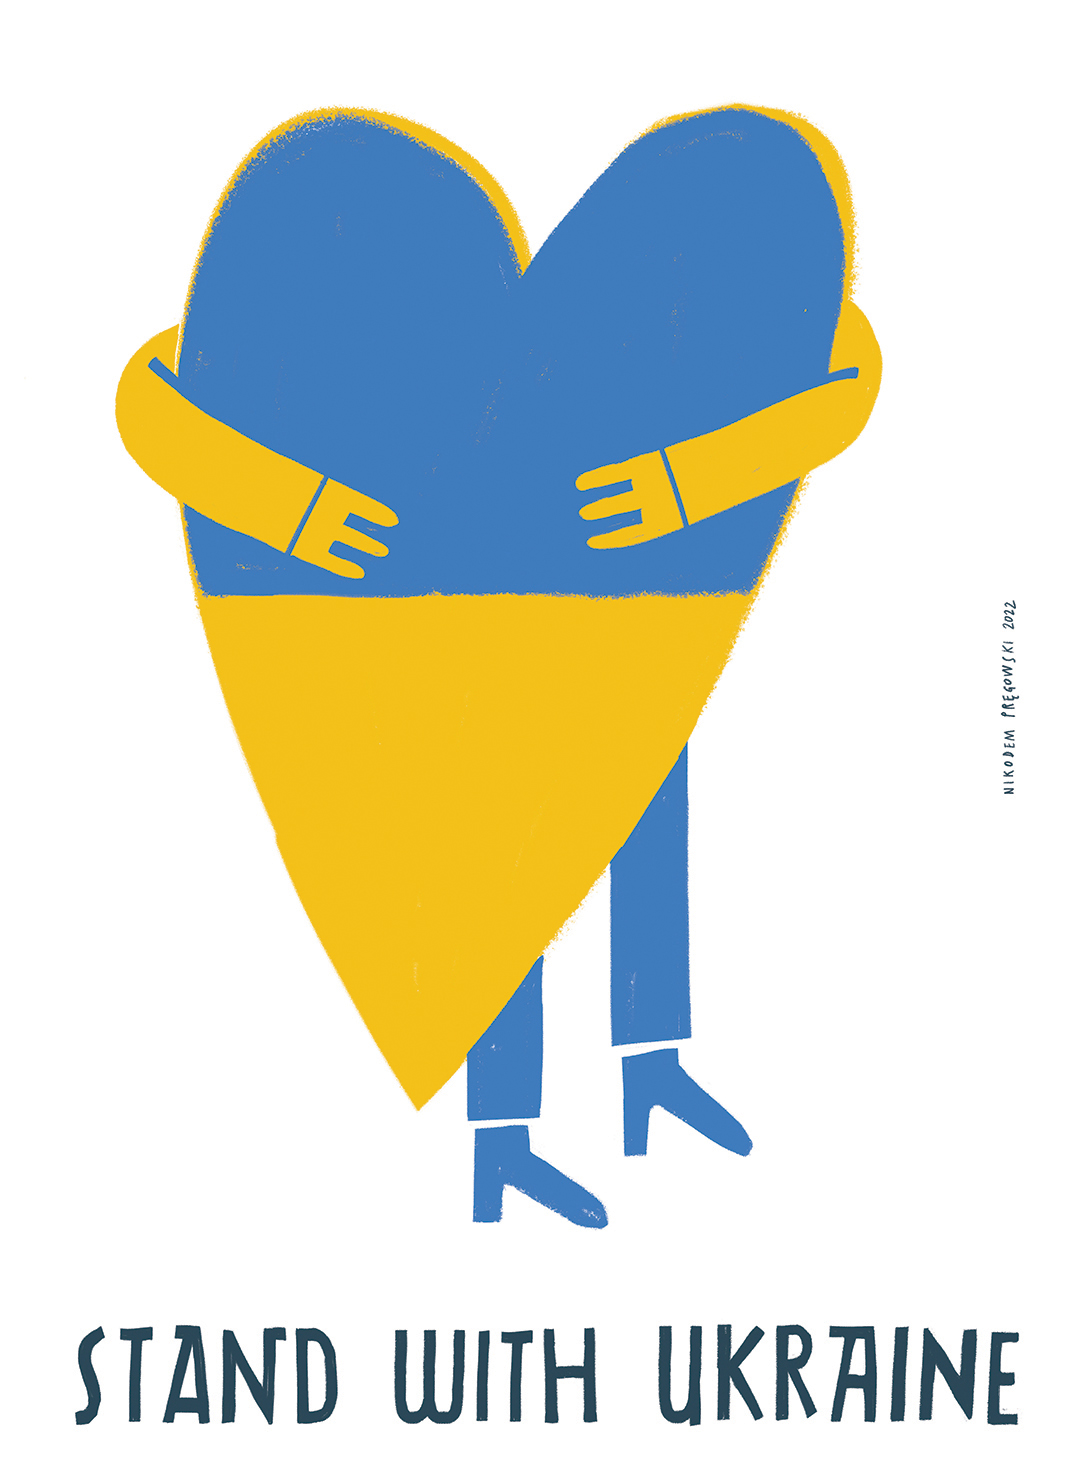 Drawing of a person holding a heart using the colors of the Ukrainian flag, created by Nikodem Pregowski, 2022.